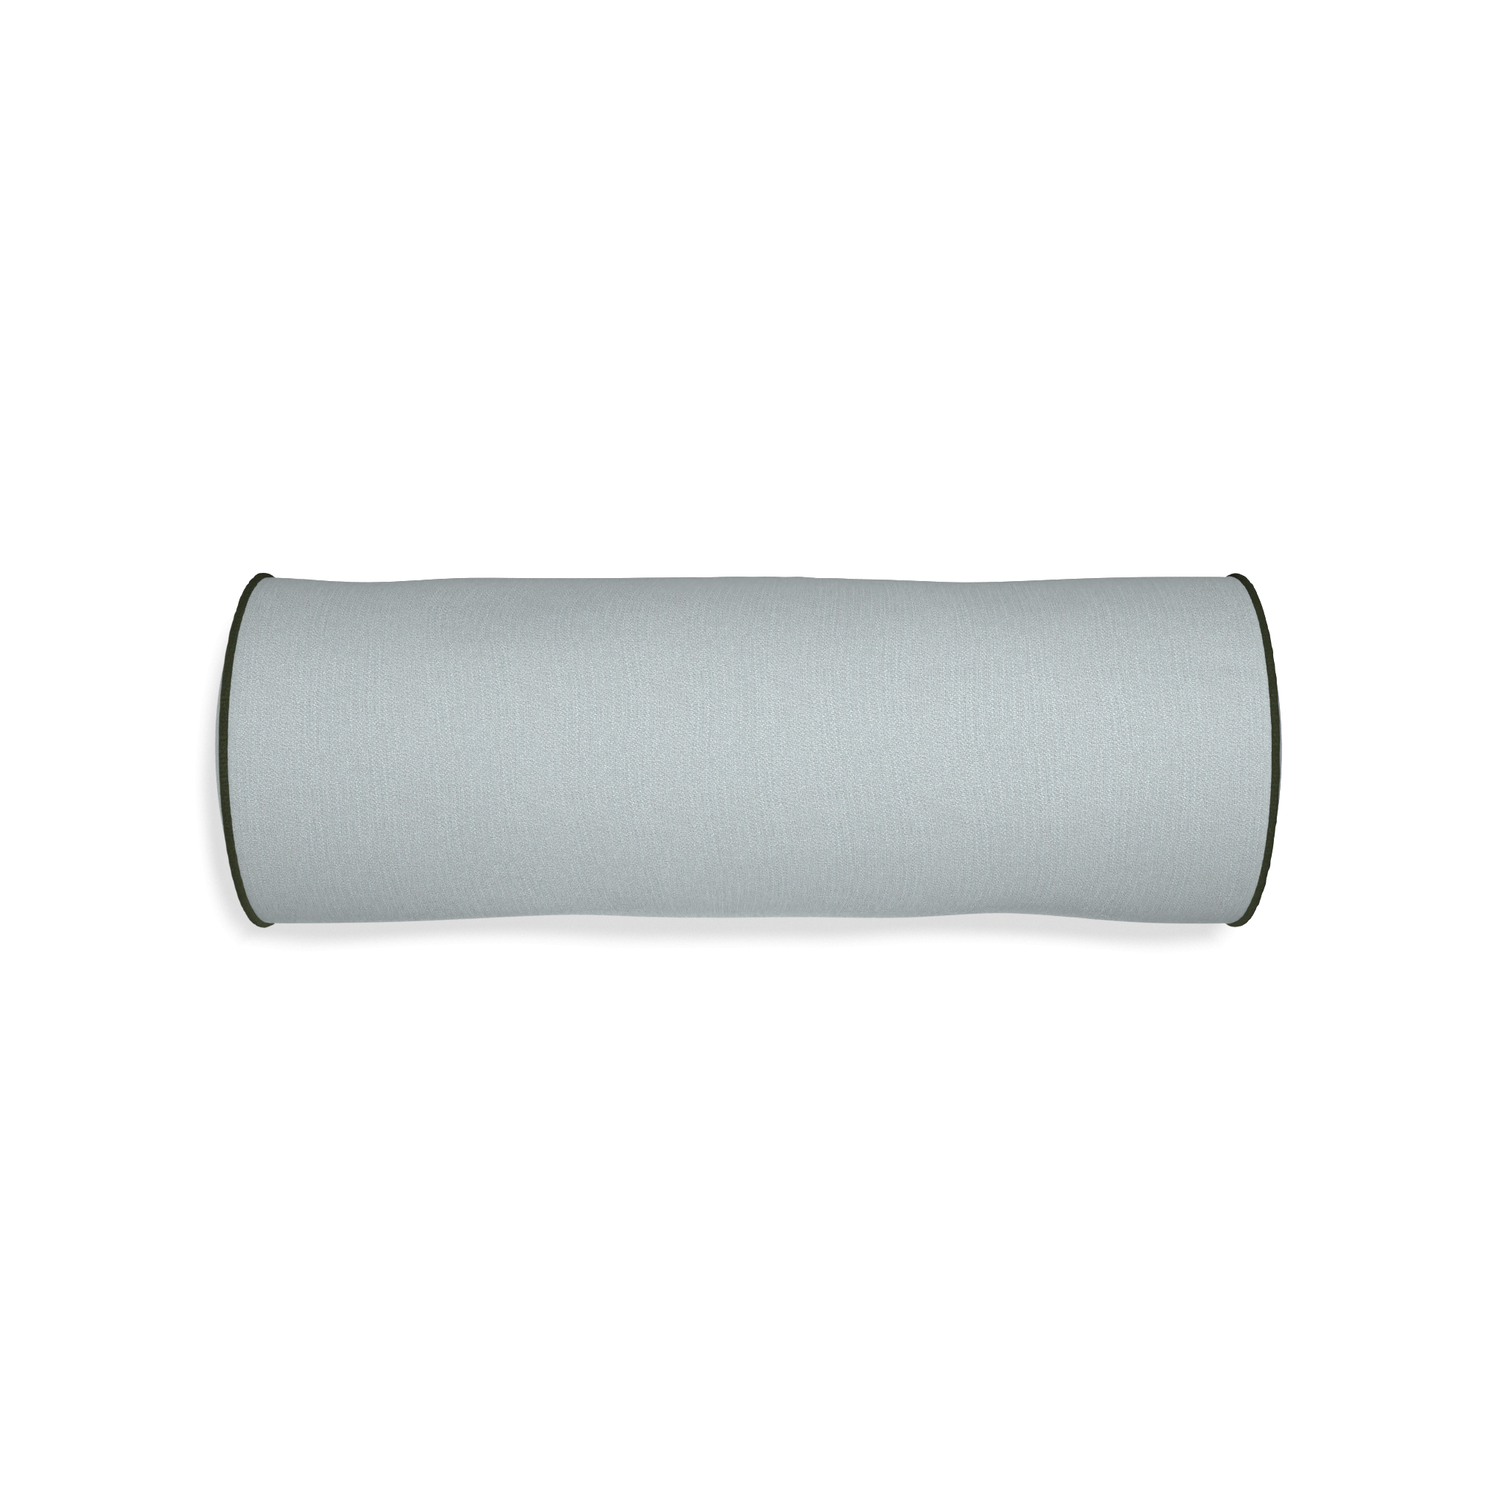 Bolster sea custom grey bluepillow with f piping on white background